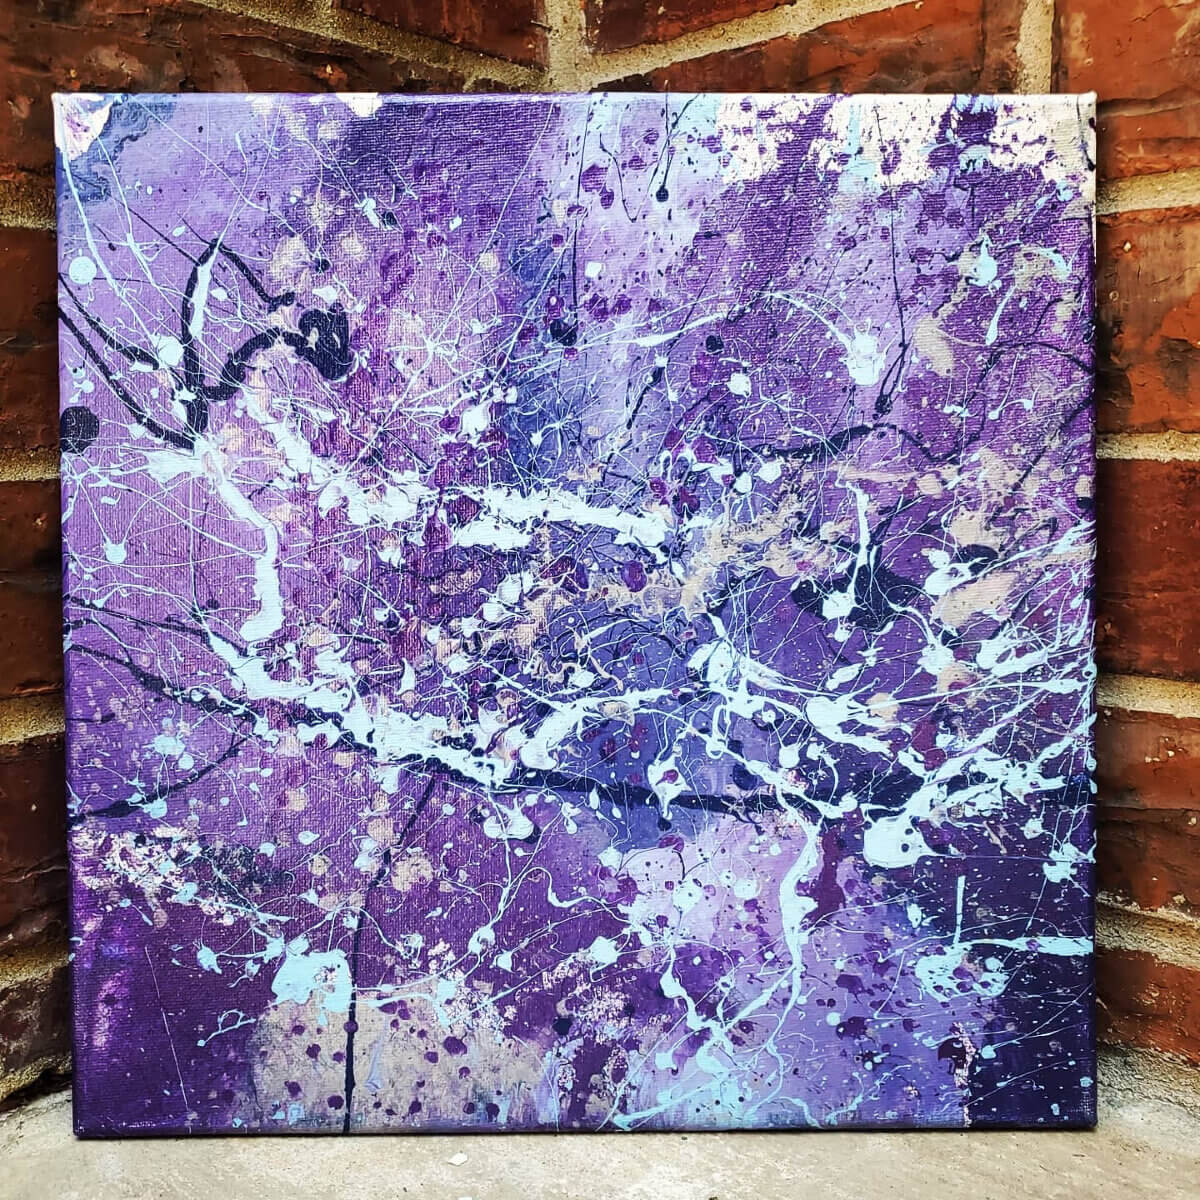 finished purple & white painted canvass